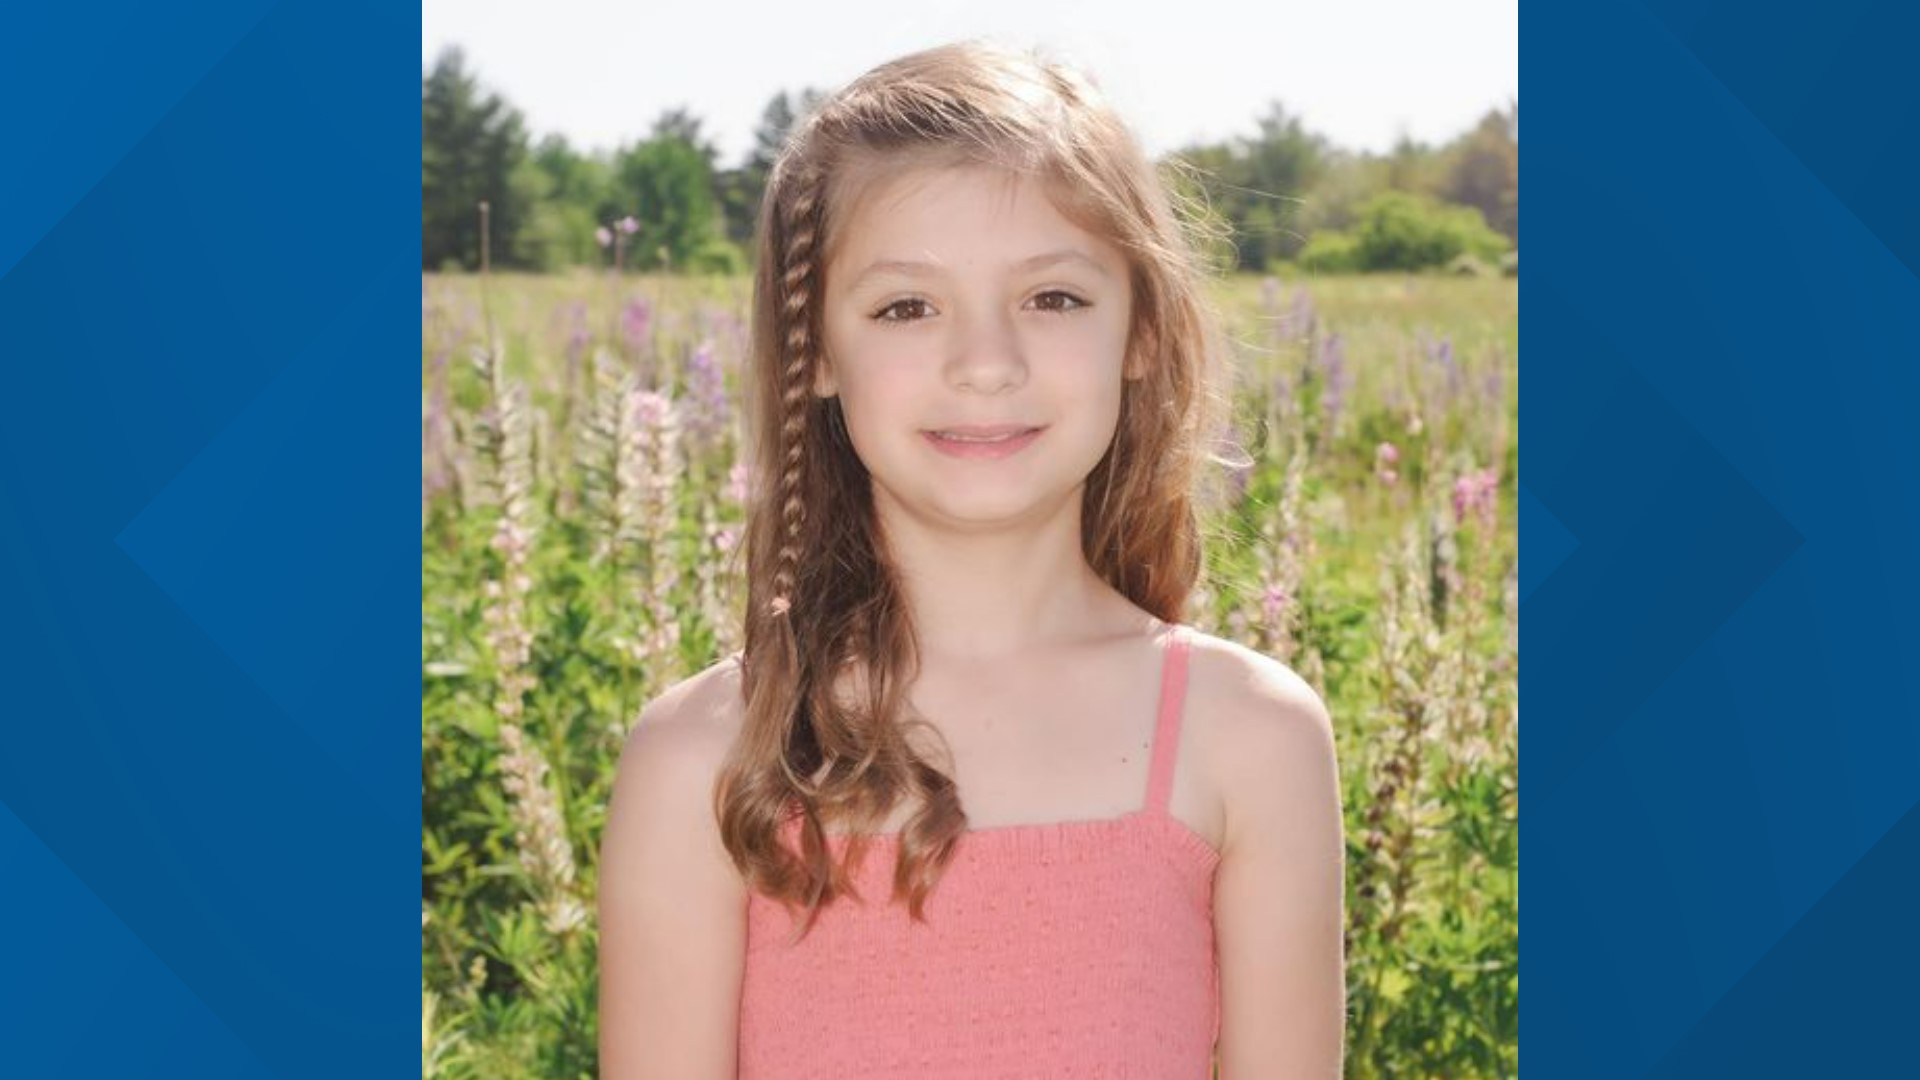 The family of Hallie Oldham, the 9-year-old who died after being injured in a windstorm while camping in July, is asking everyone to honor her life by being kind.